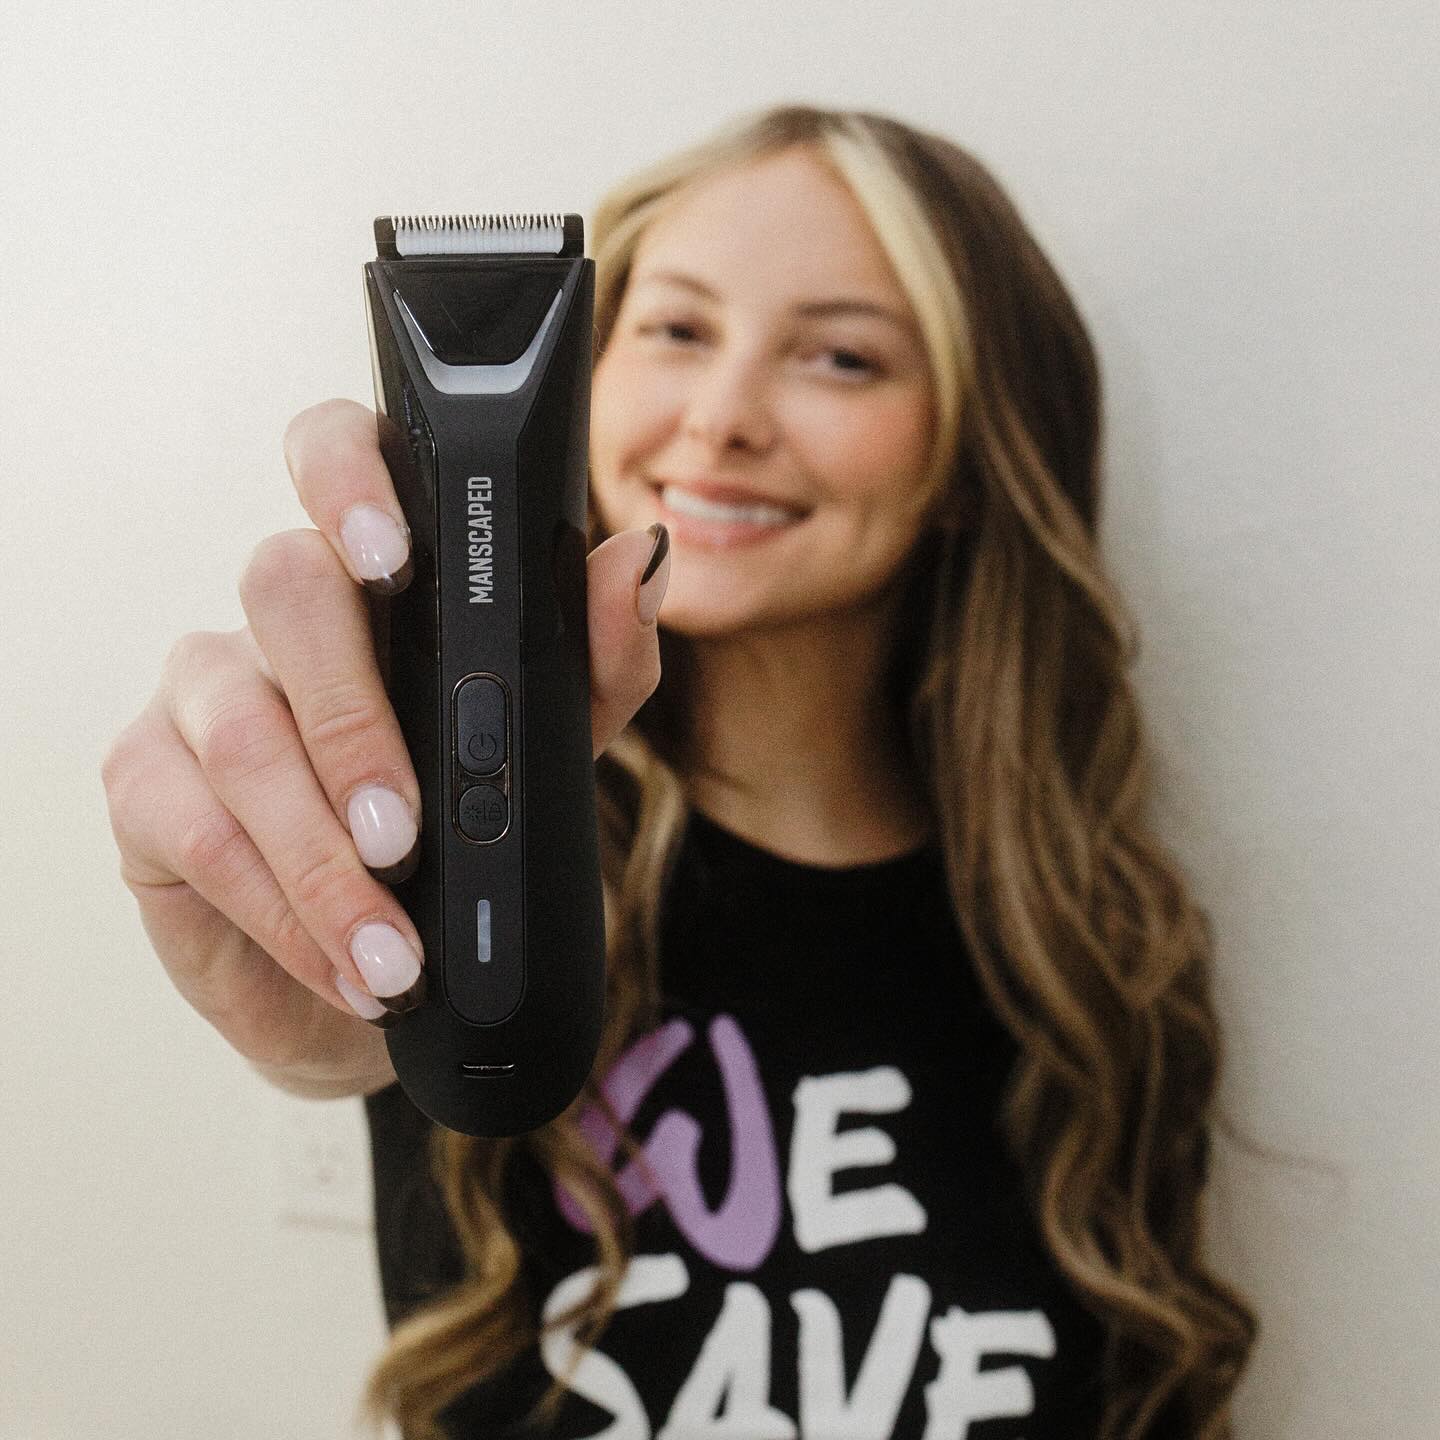 April might almost be over but Testicular Awareness is important all year long! Get 20% OFF with code RACHELH at Manscaped.com and make a donation to the @tcsociety at checkout. #shavetosave